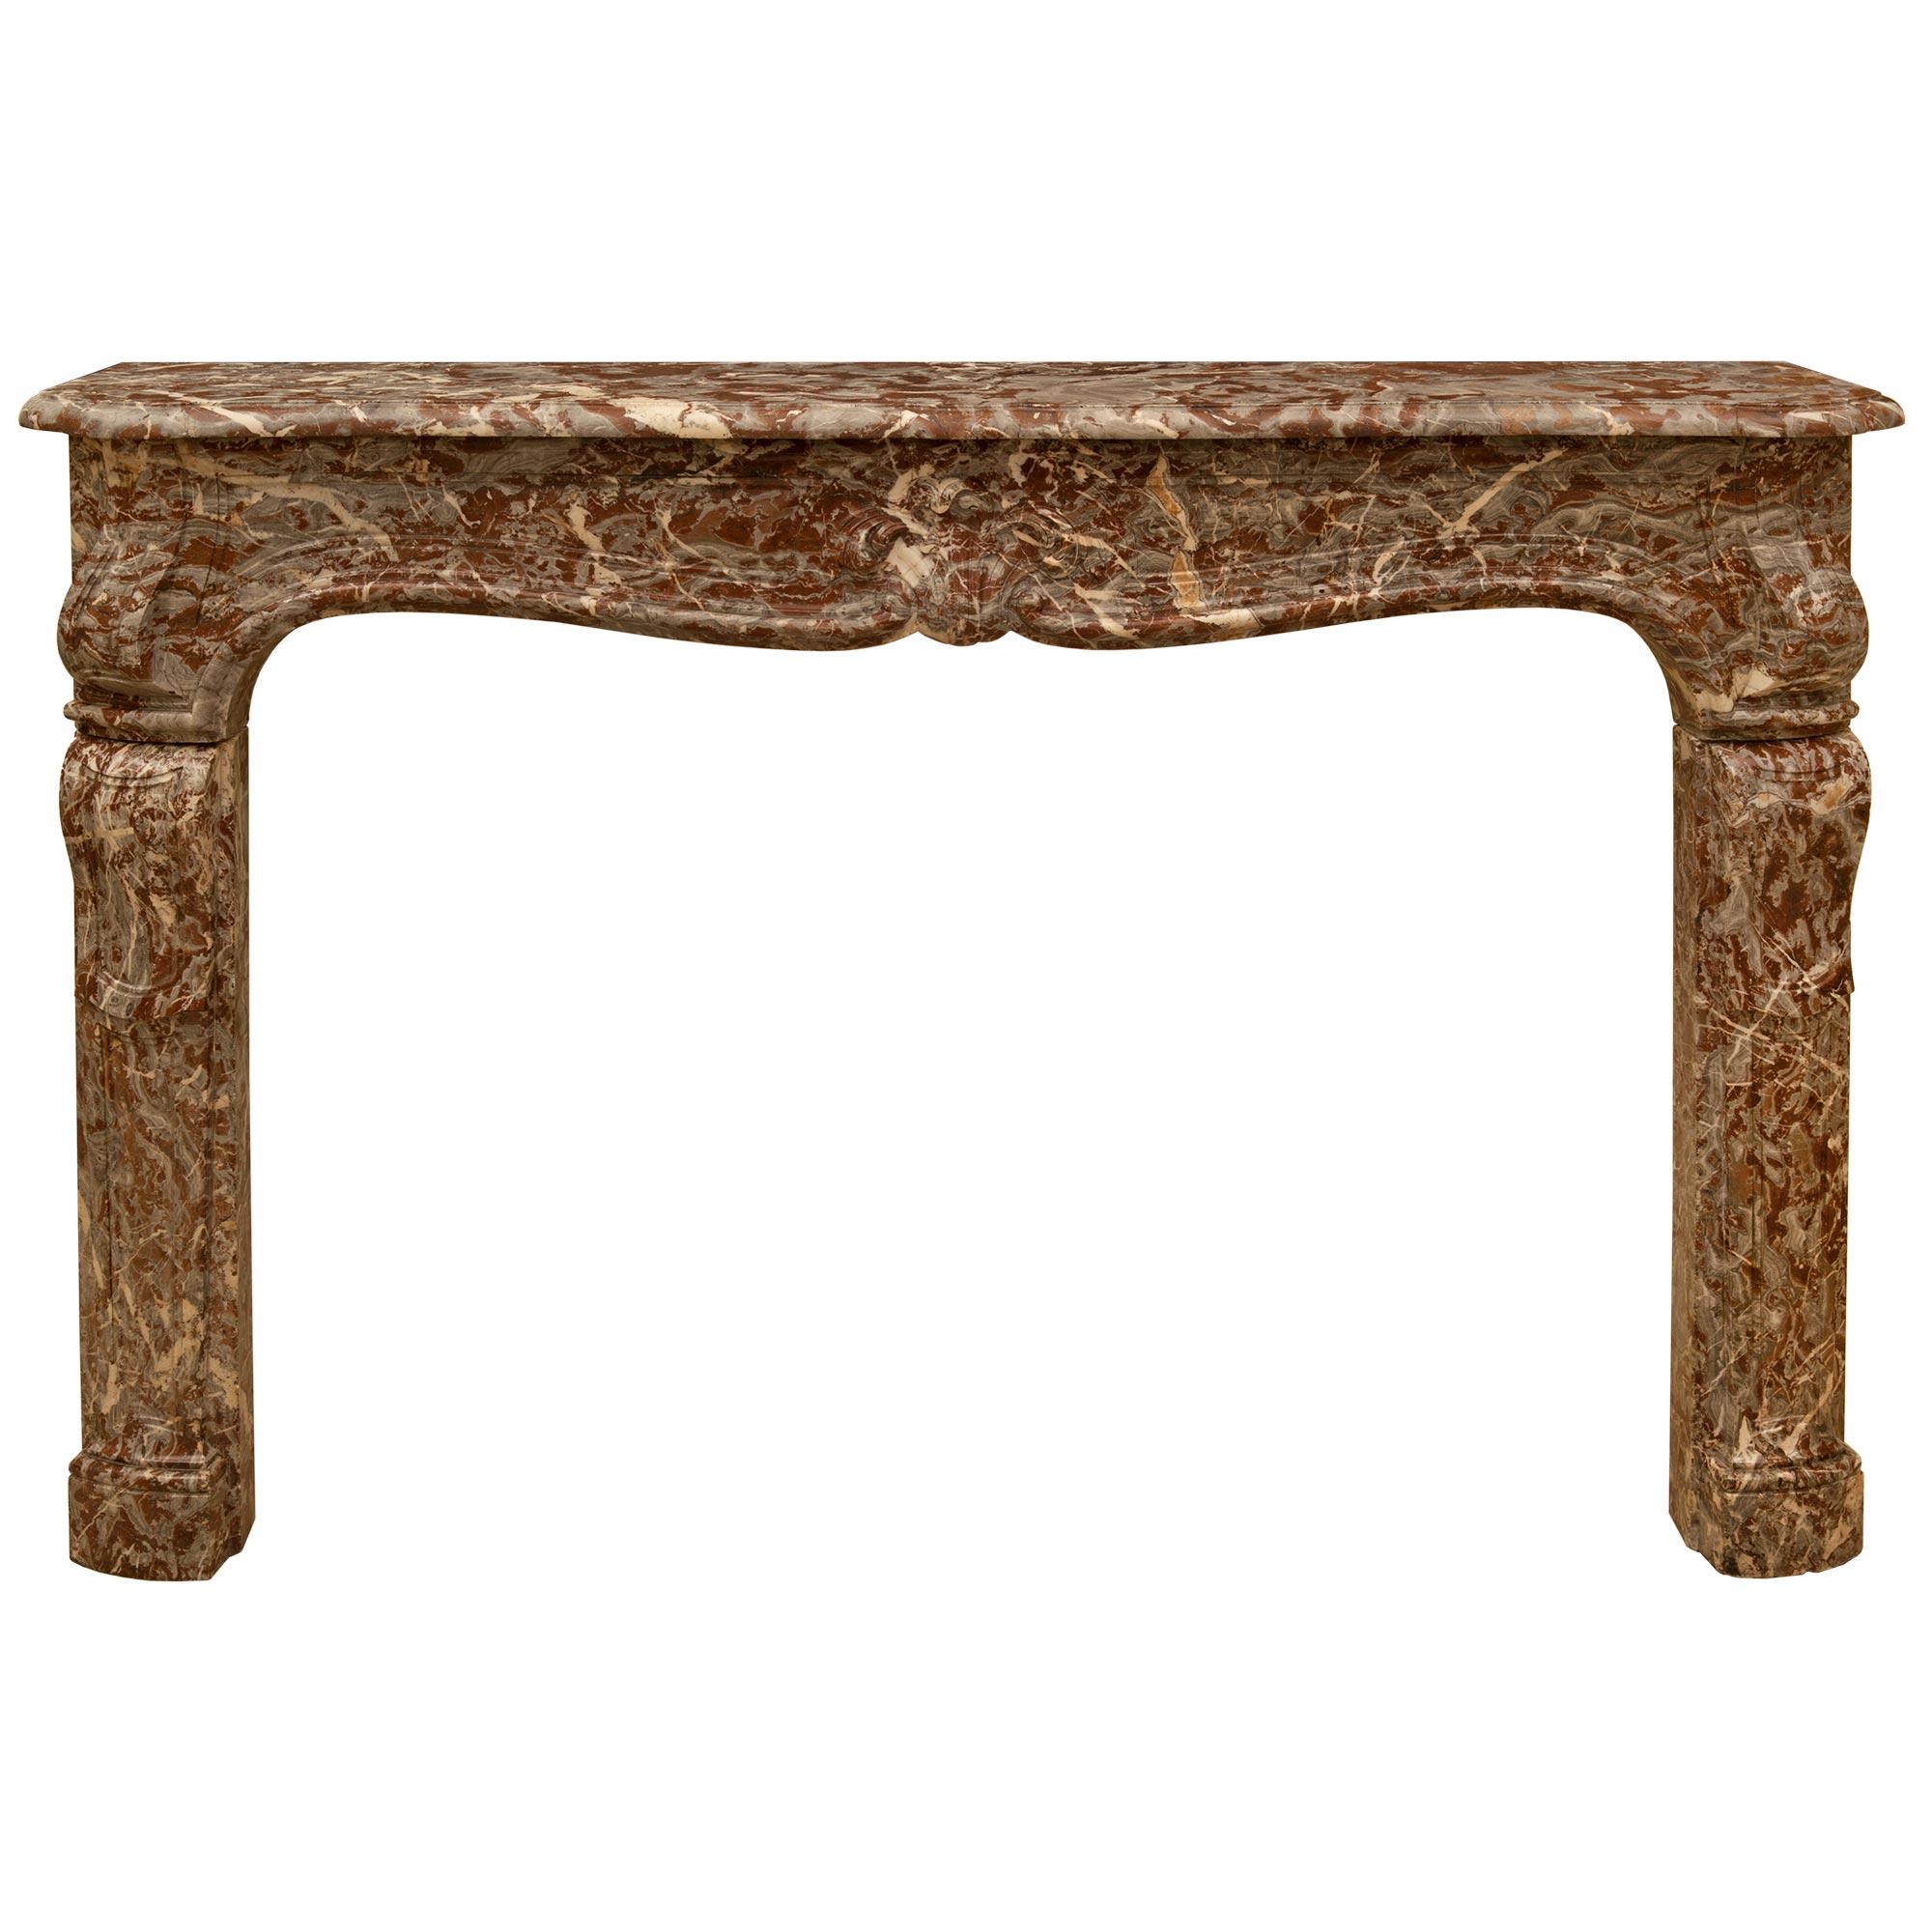 French 18th Century Louis XV Period Rouge Royal Marble Mantel